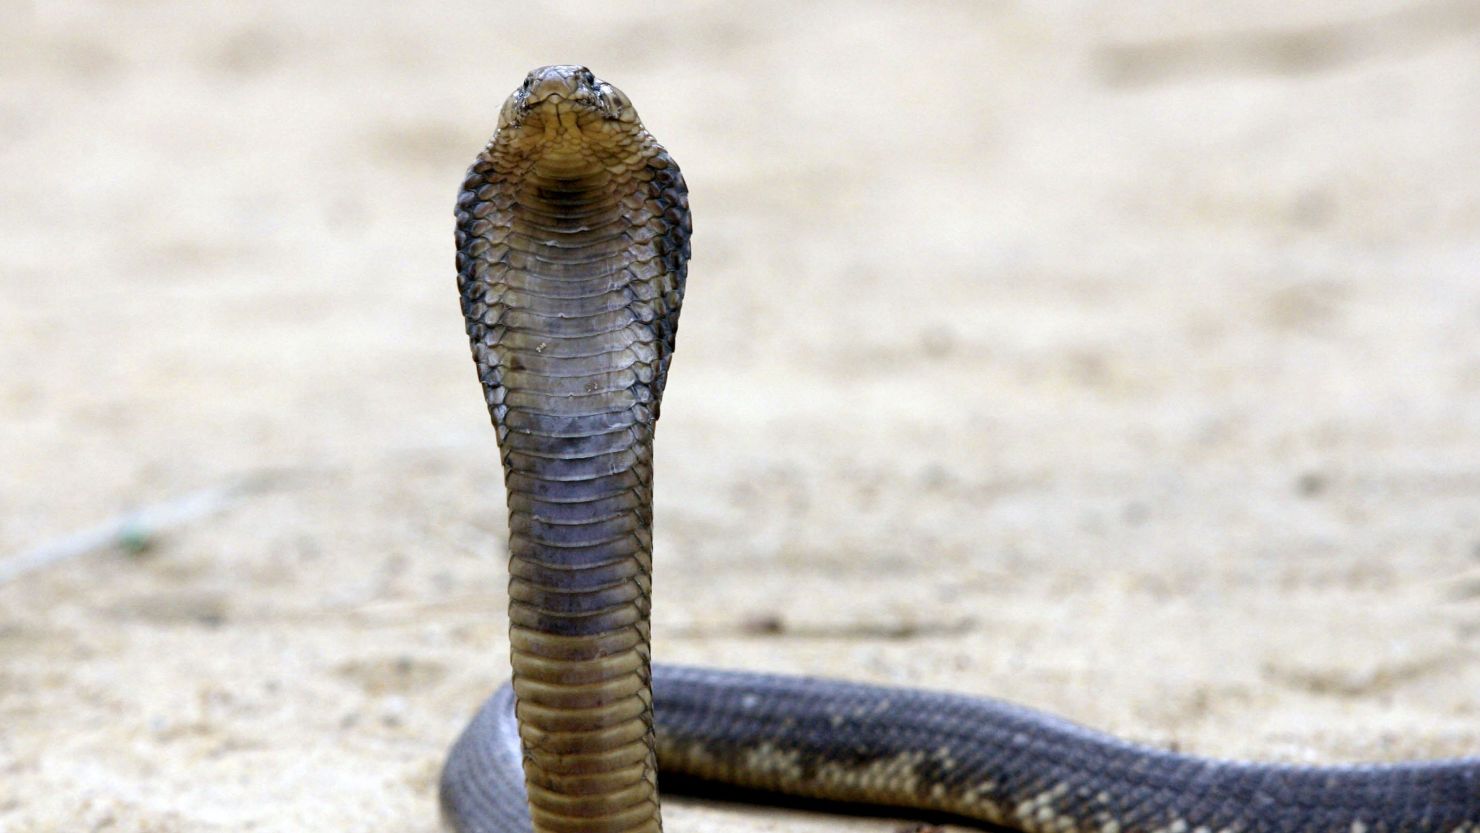 An Egyptian cobra like this one escaped from a carry-on bag on an Egypt Air flight from Cairo to Kuwait.